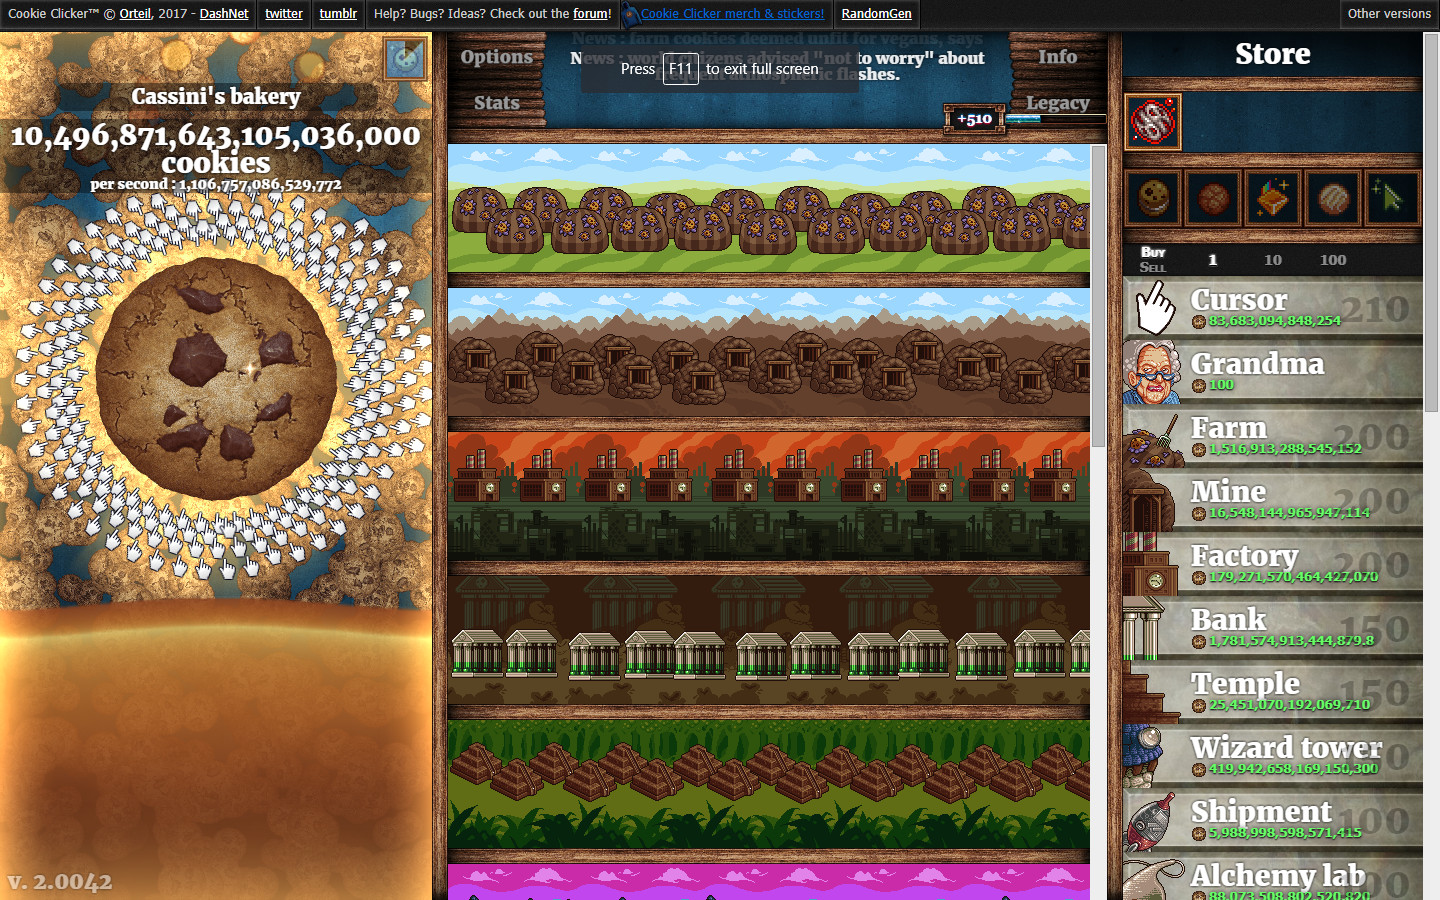 Top 22 Halloween Cookies Cookie Clicker - Most Popular Ideas of All Time